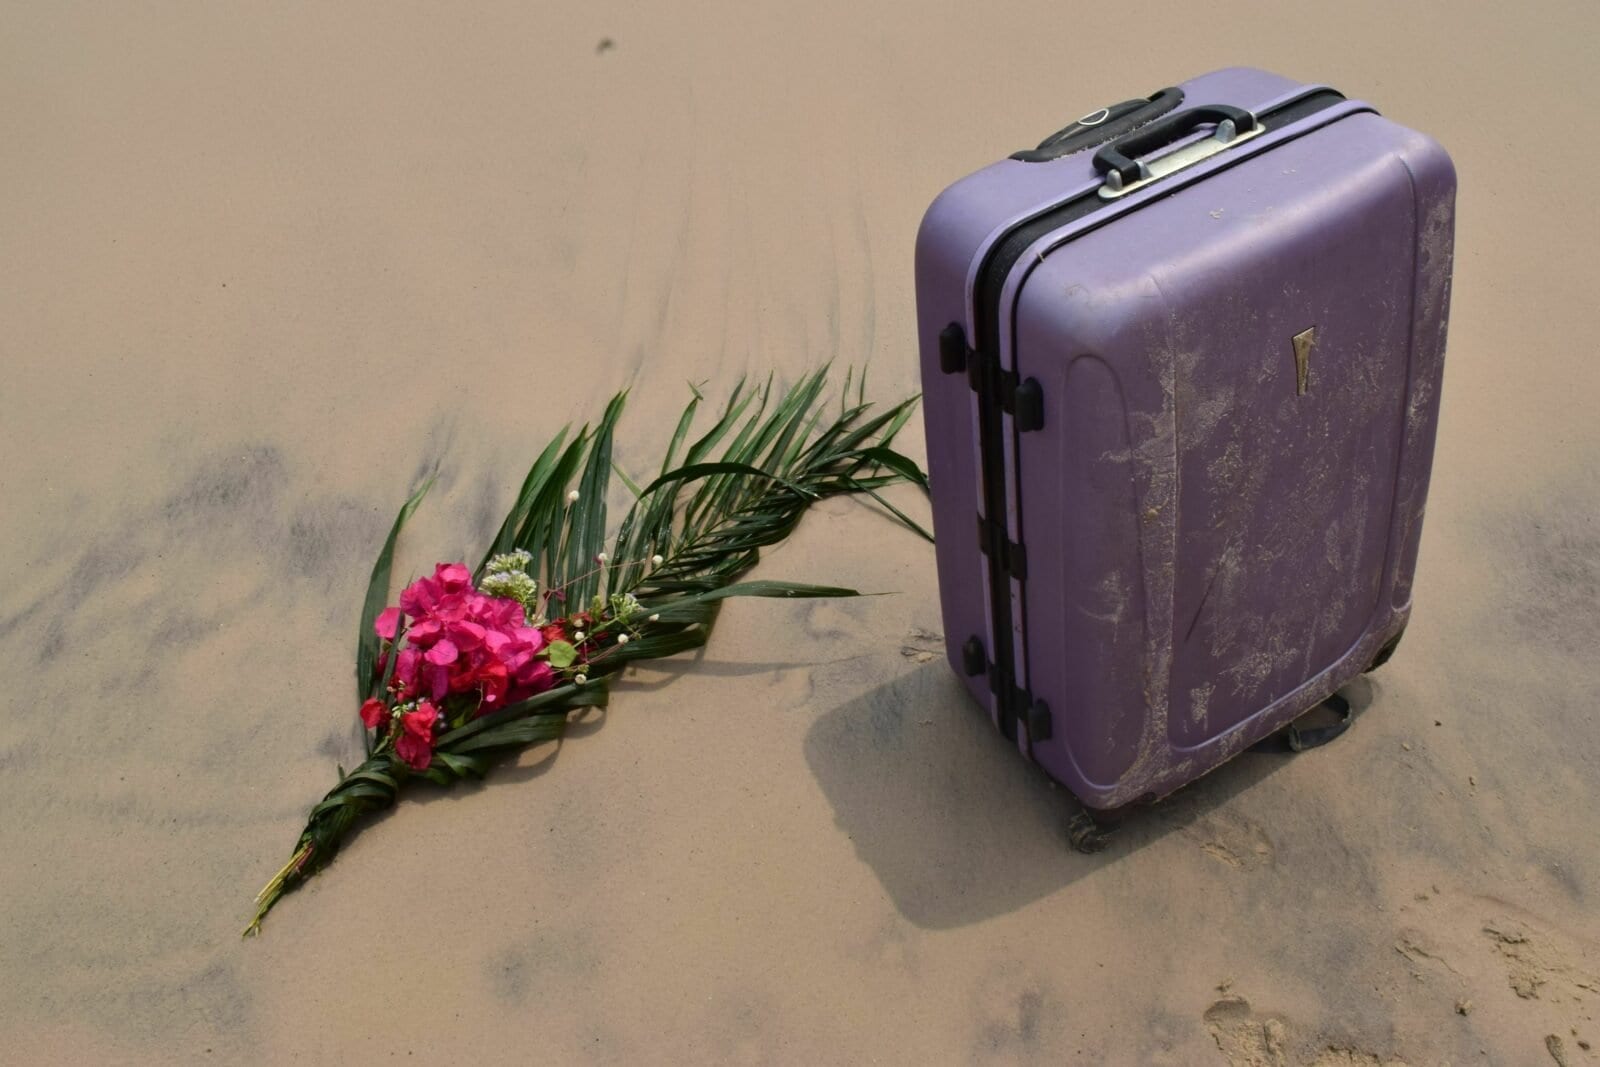 Suitcase and flowers on the beach.